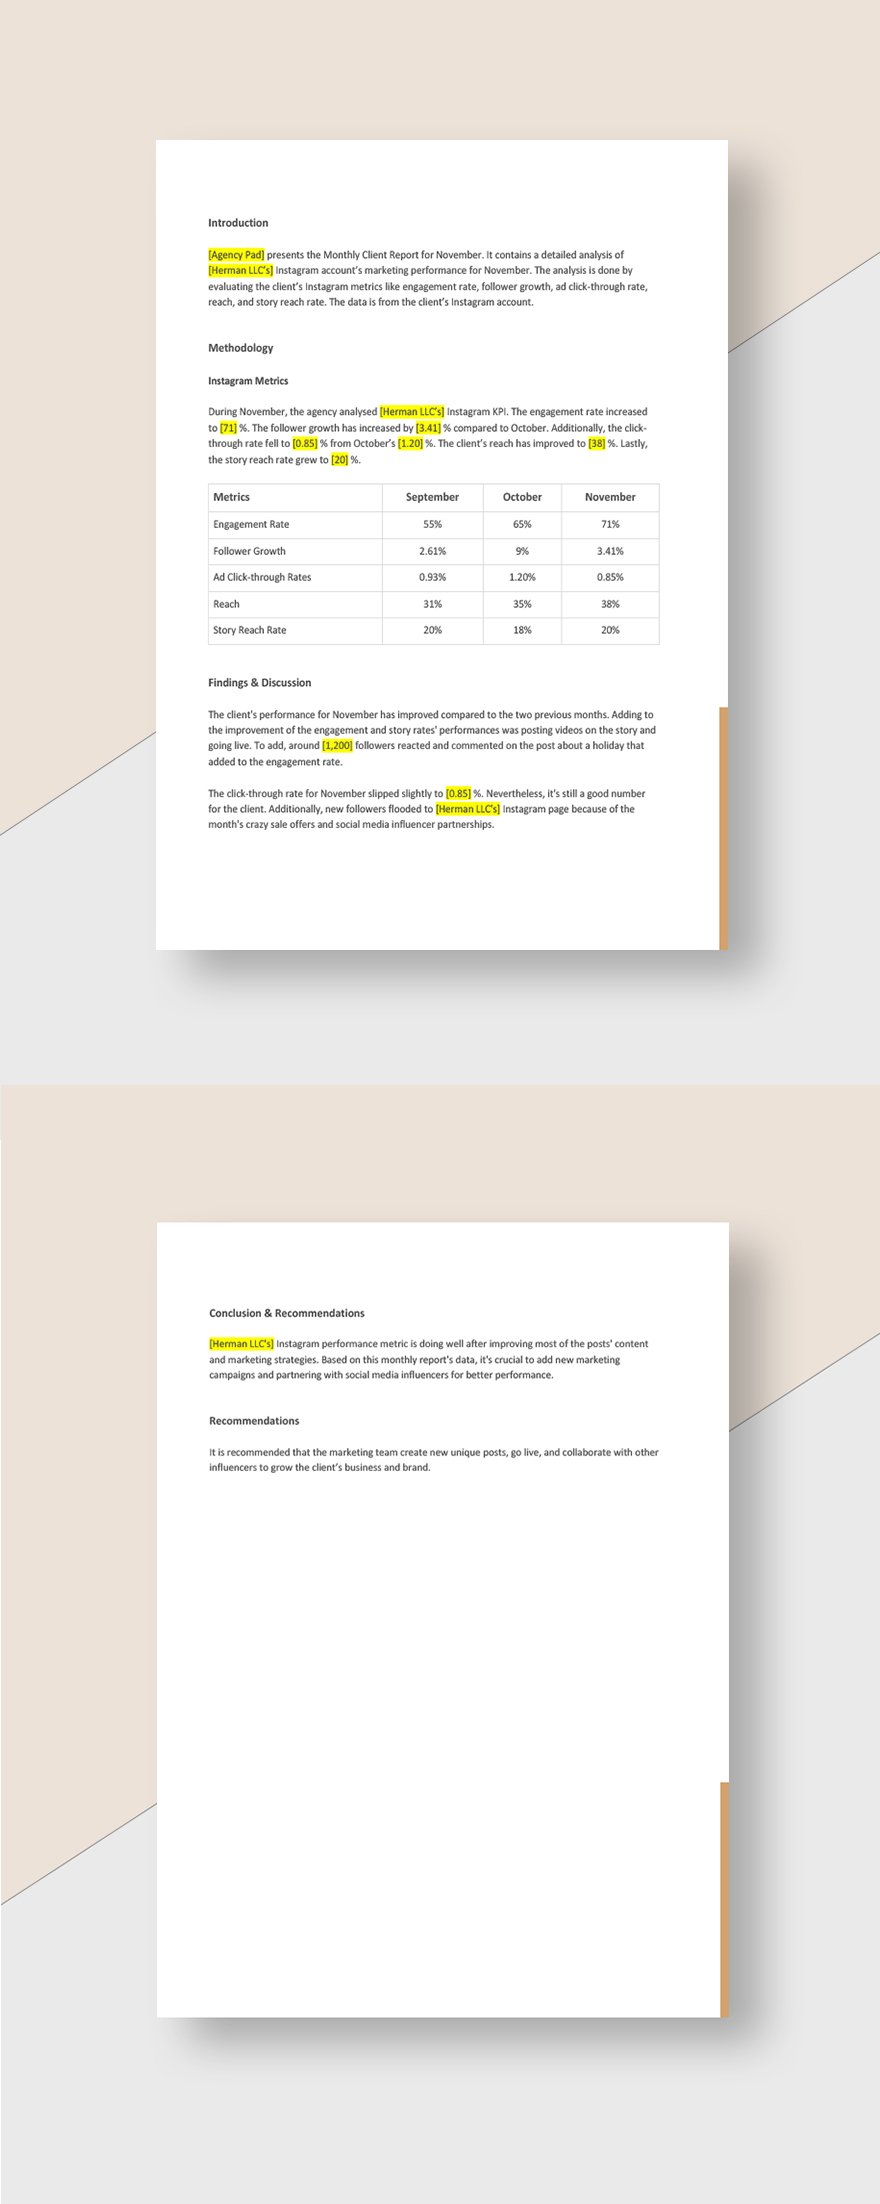 Editable Advertising Agency Monthly Client Report Template